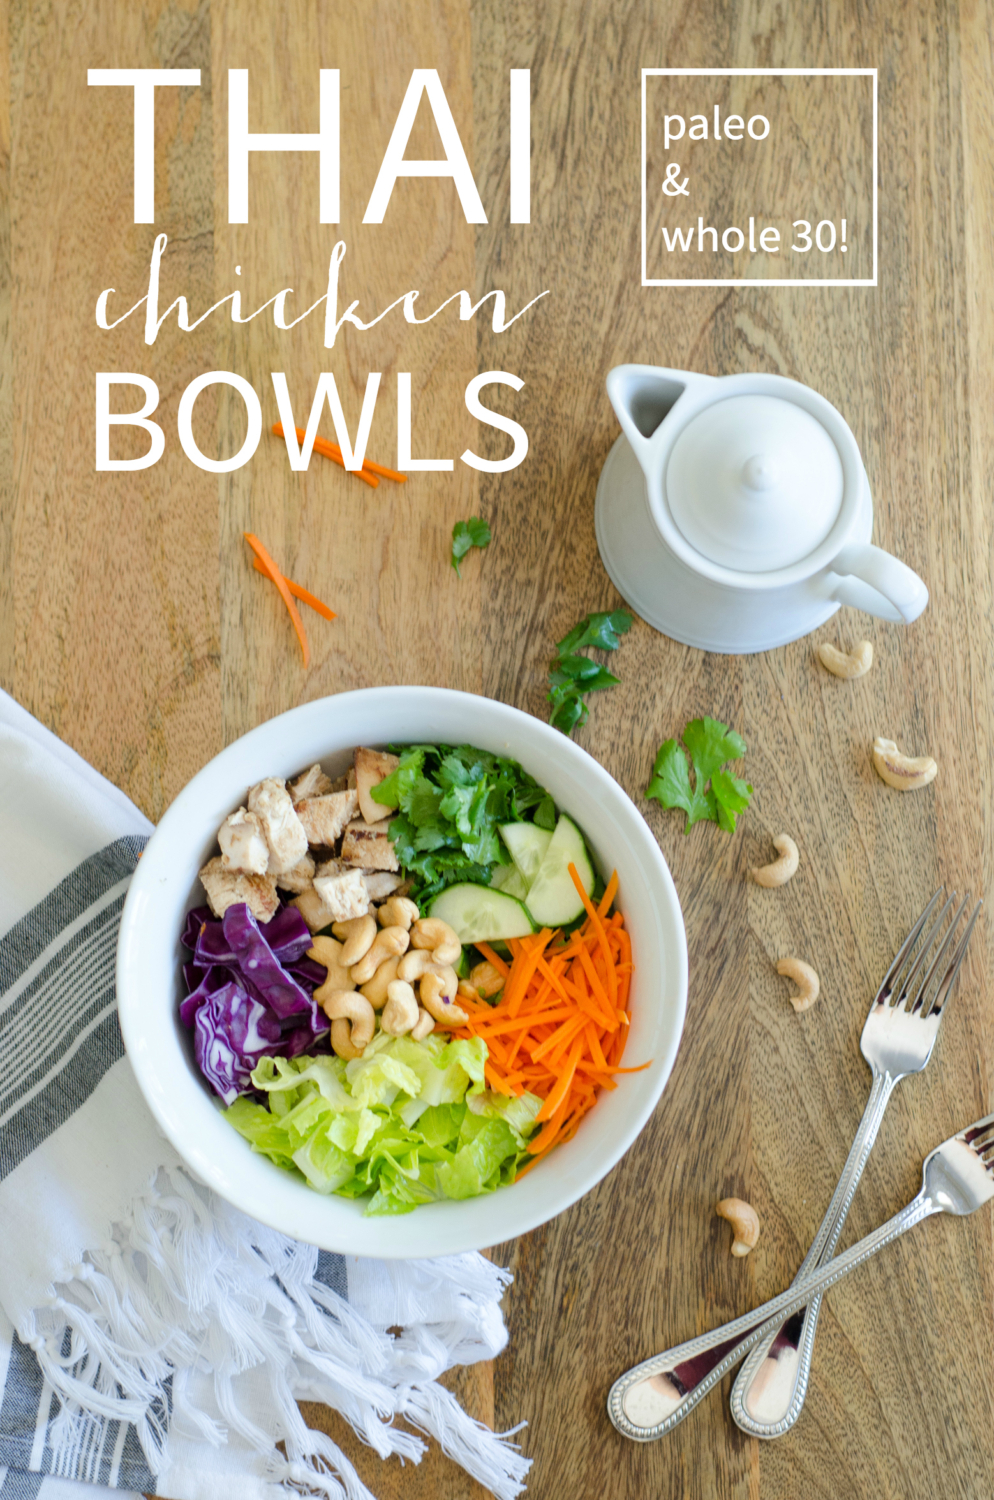 Thai chicken bowls - like thai lettuce wraps in a bowl! Loaded with veggies and topped with a nutty, creamy dressing. Paleo and Whole 30 recipe.